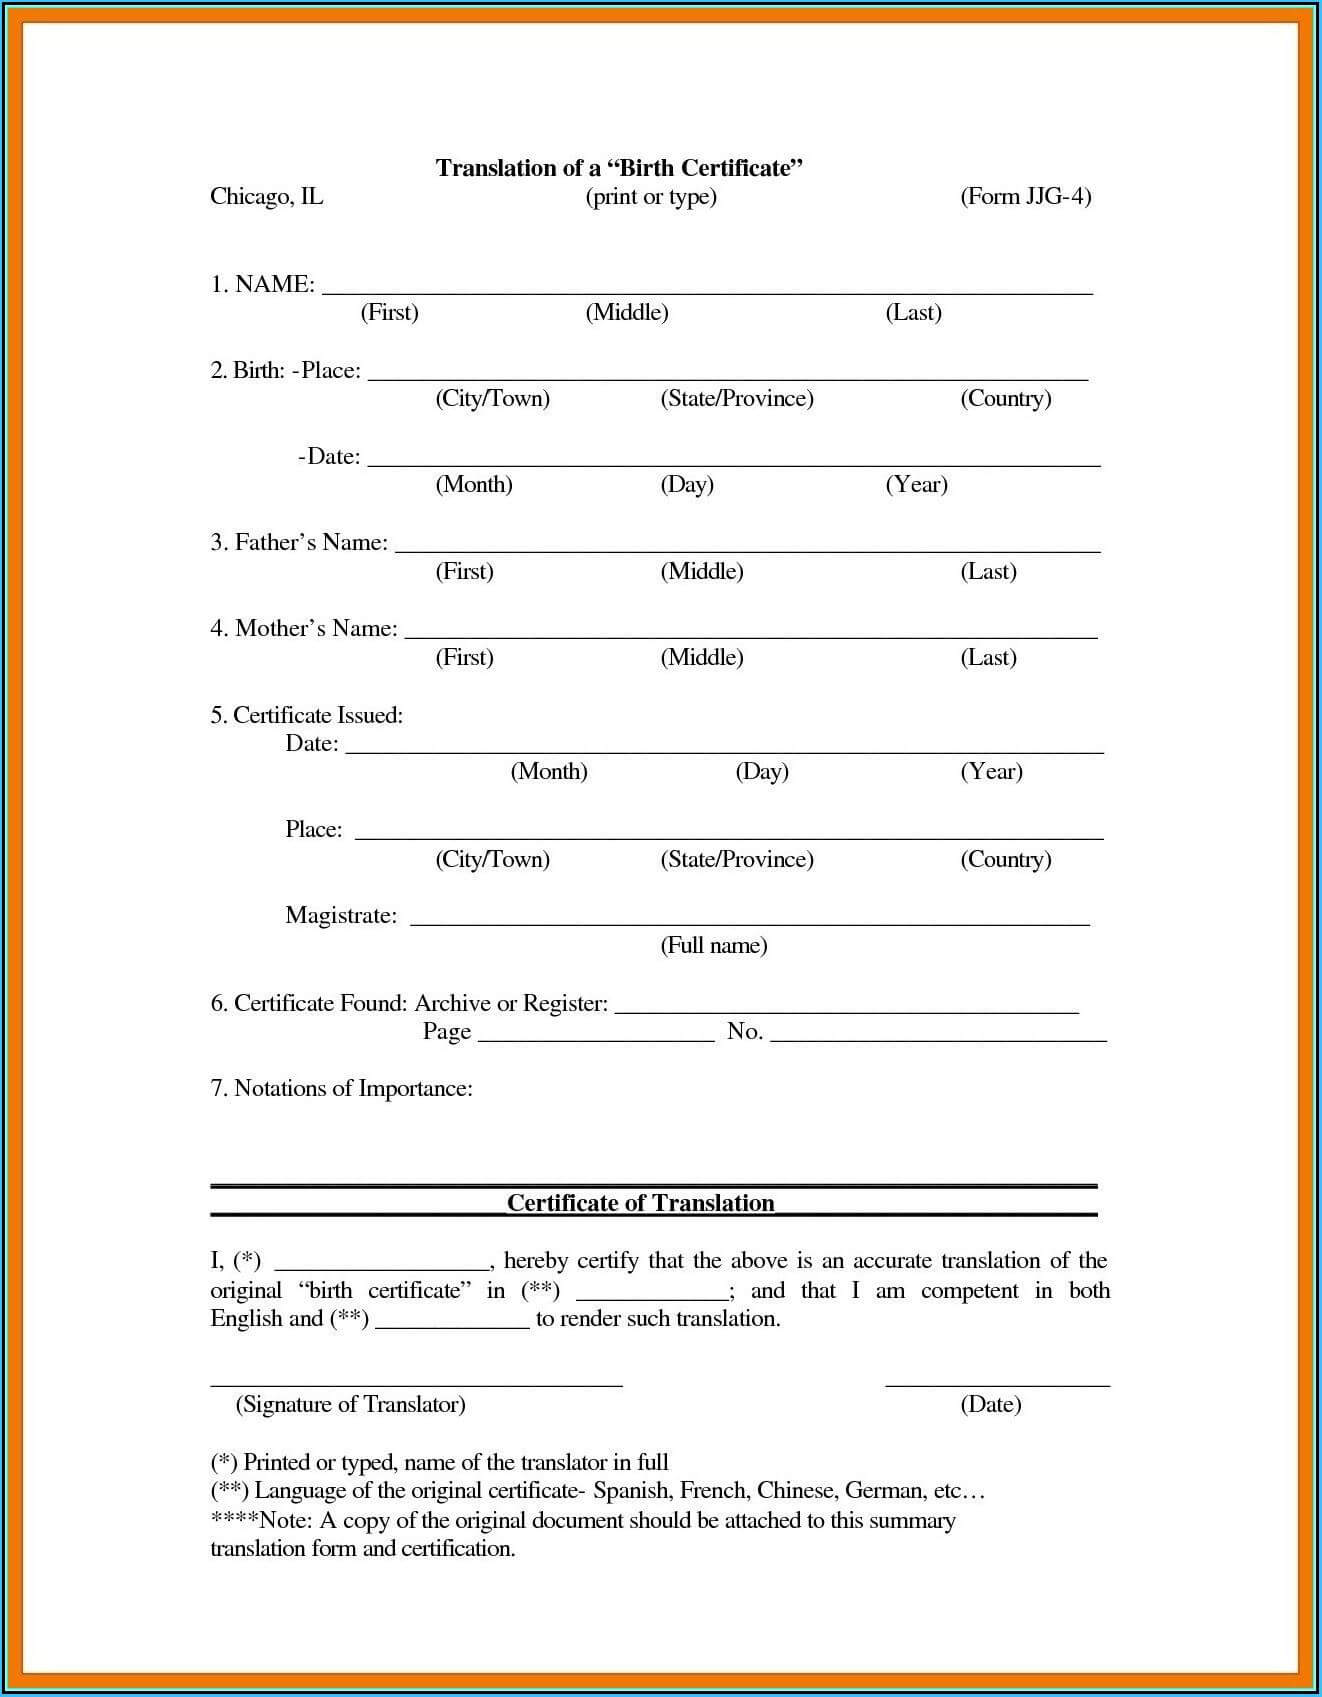 024 Official Birth Certificate Template Simple Uscis Intended For Official Birth Certificate Template